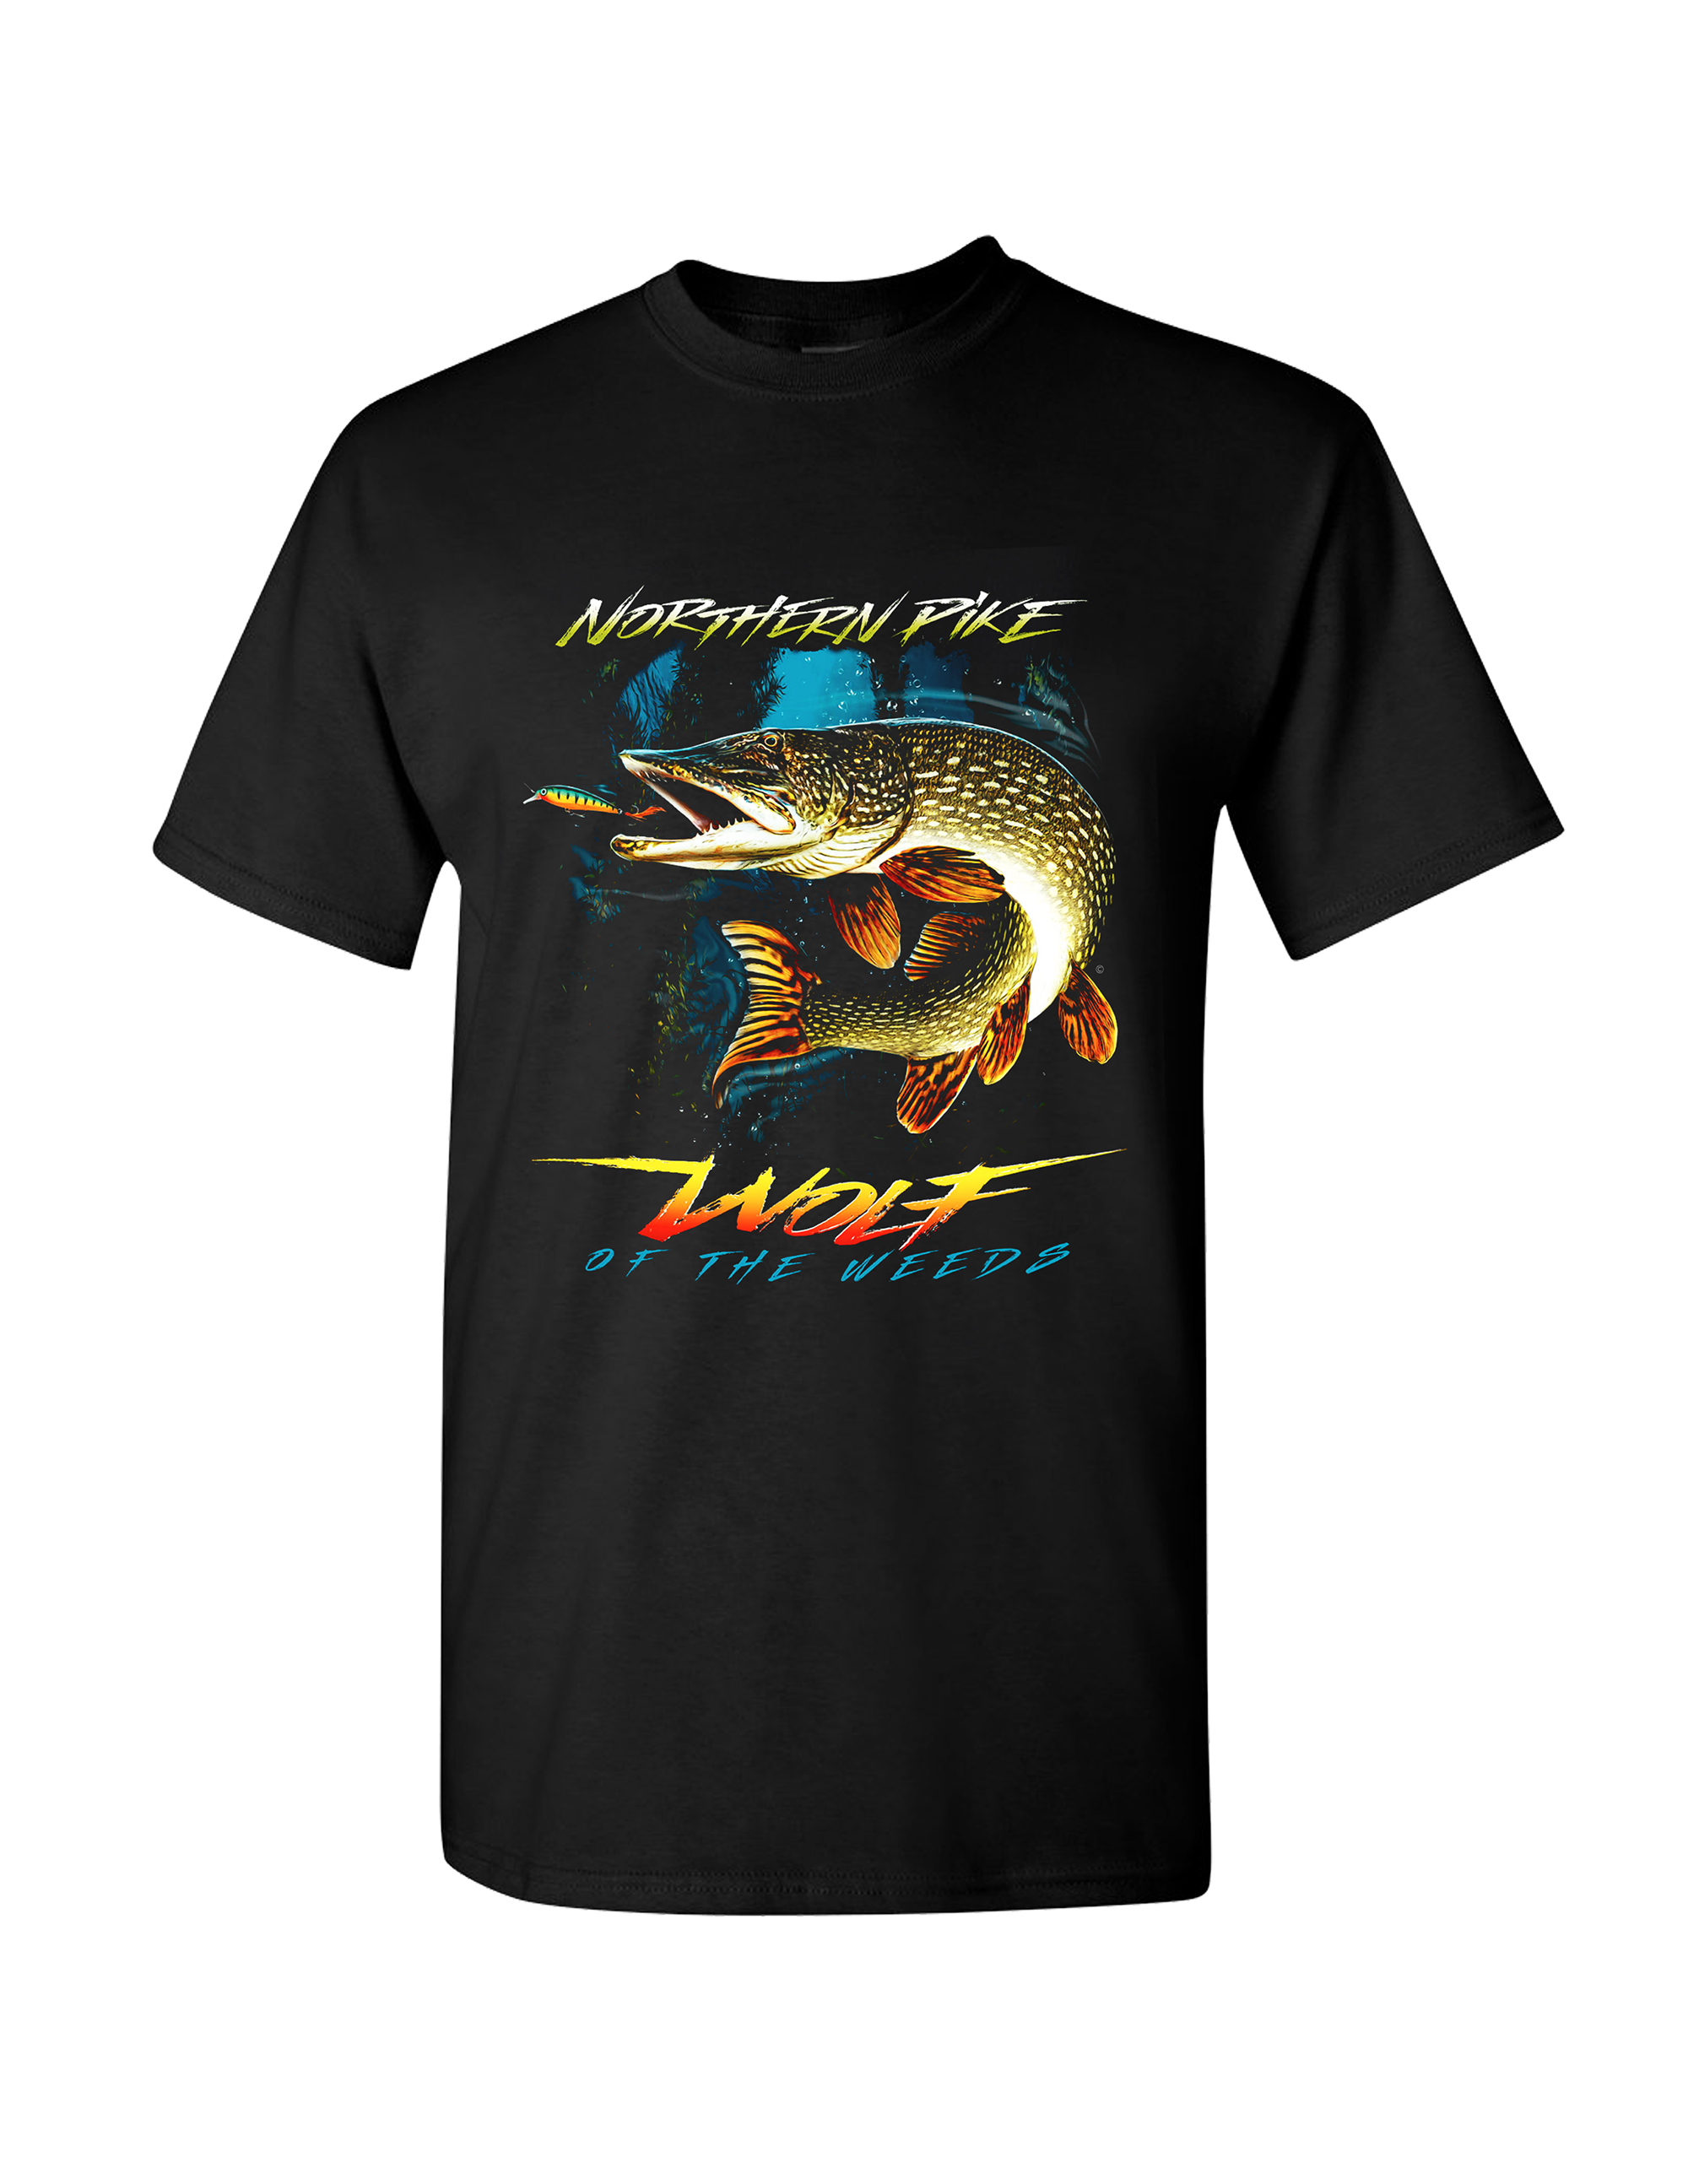 Northern Pike “Wolf of the Weeds” Short Sleeve T-shirt – Follow